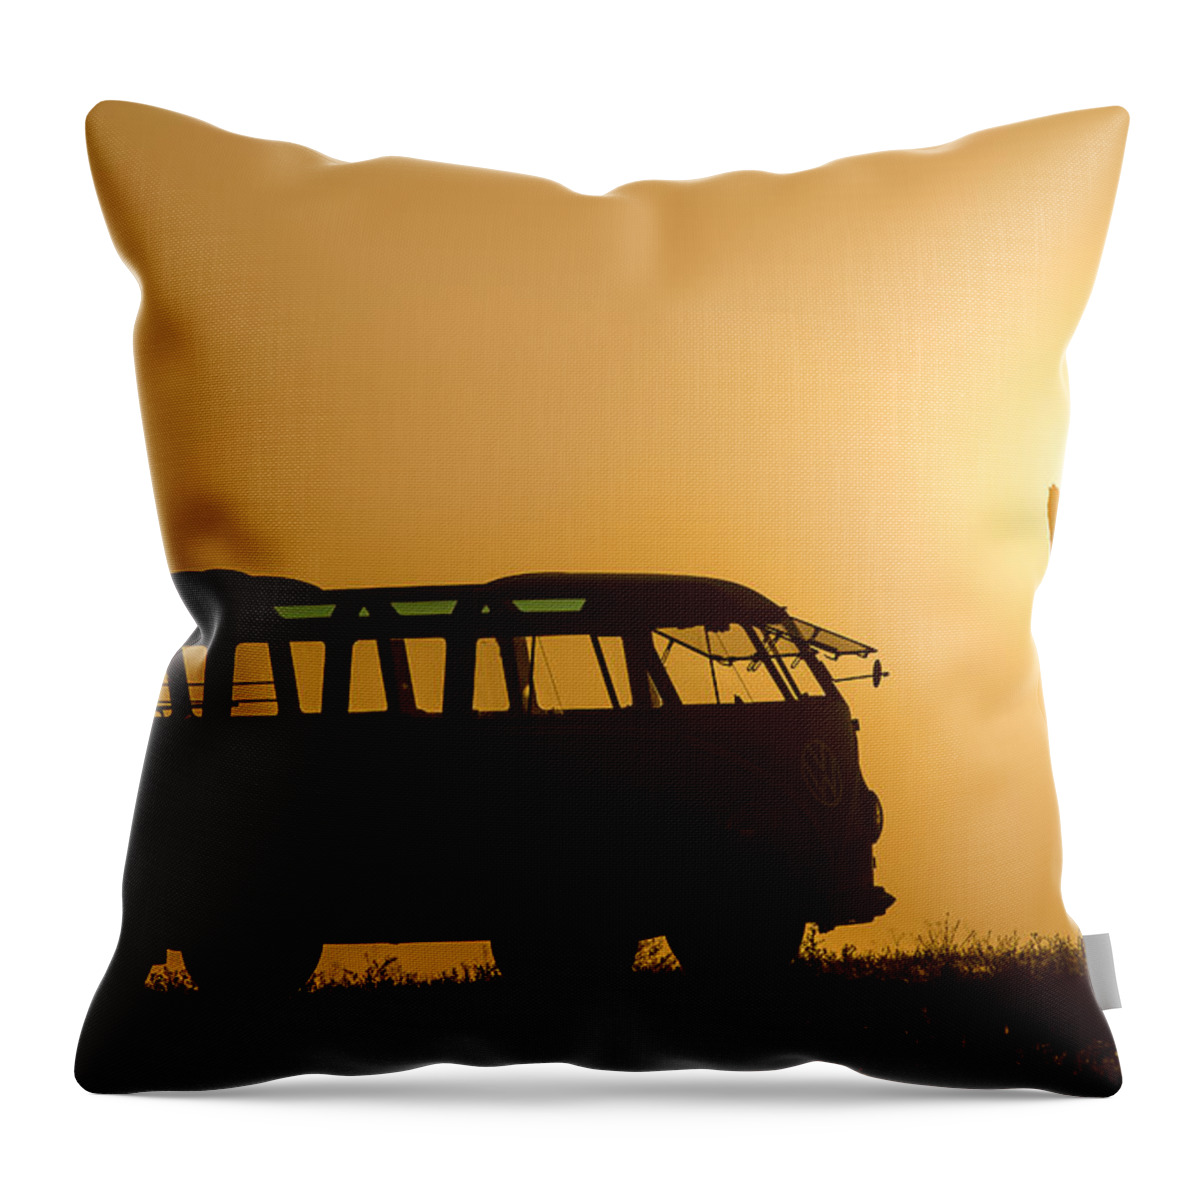 23 Window Throw Pillow featuring the photograph Carrying The Sun by Richard Kimbrough